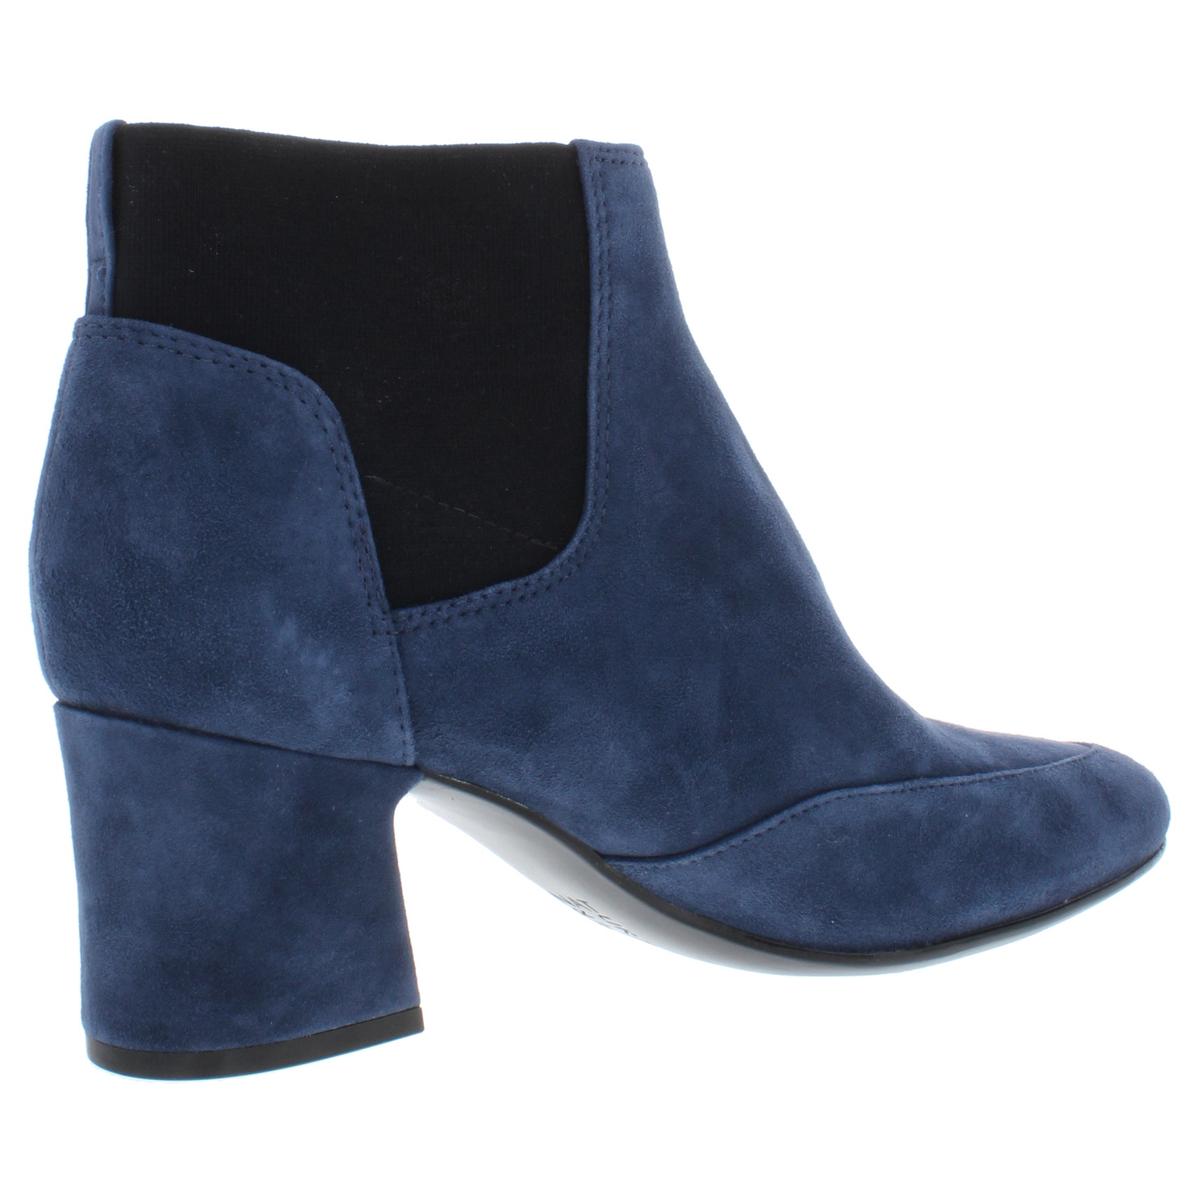 Naturalizer Womens Danica Leather Ankle Block Heel Booties Shoes BHFO ...